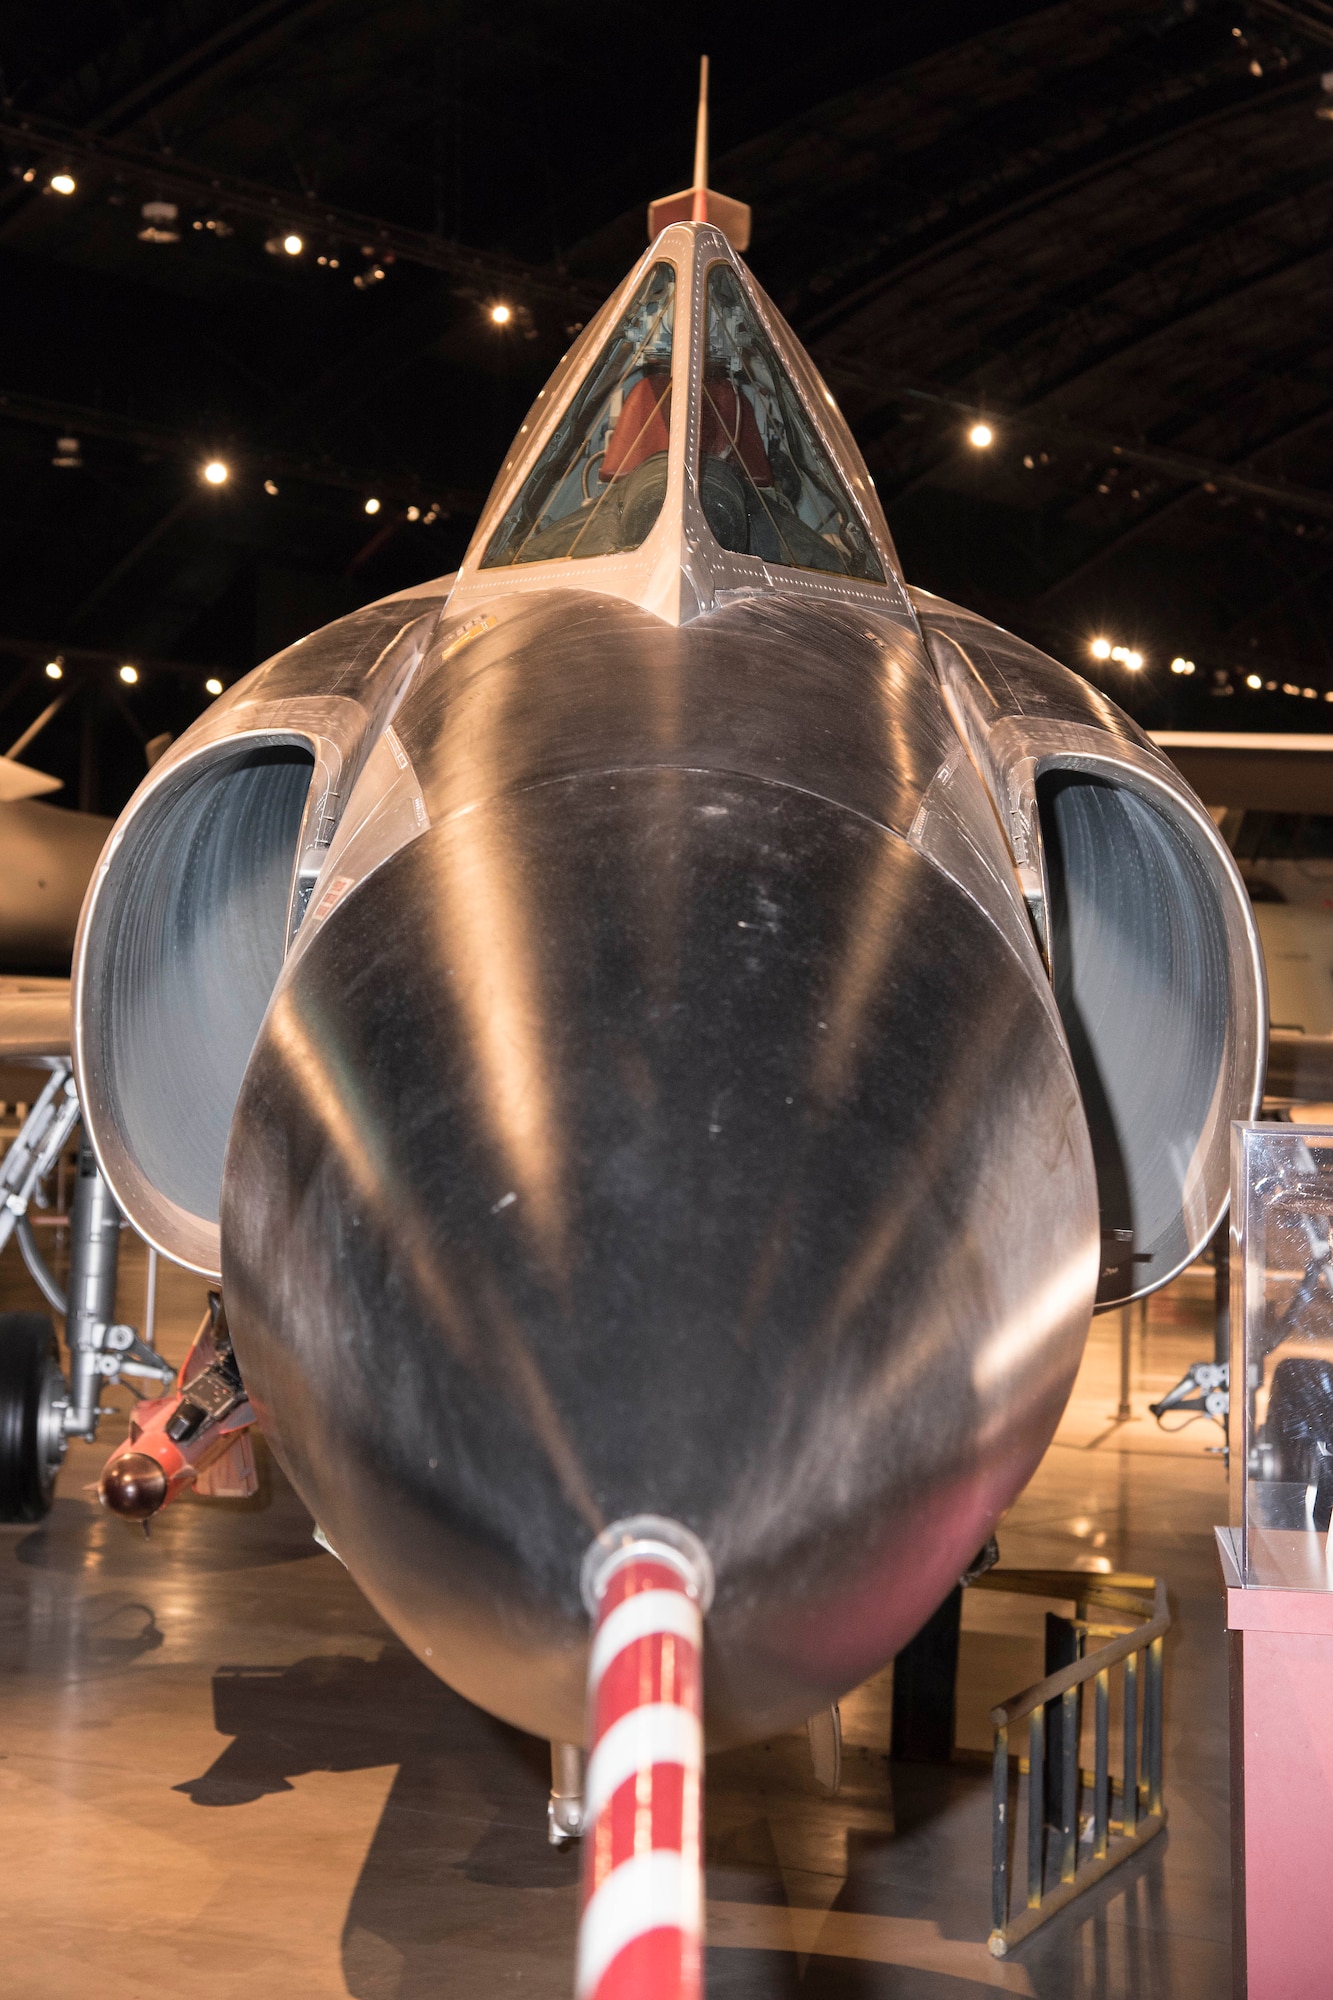 DAYTON, Ohio -- Convair F-102A Delta Dagger in the Cold War Gallery at the National Museum of the United States Air Force (U.S. Air Force photo by Ken LaRock)
